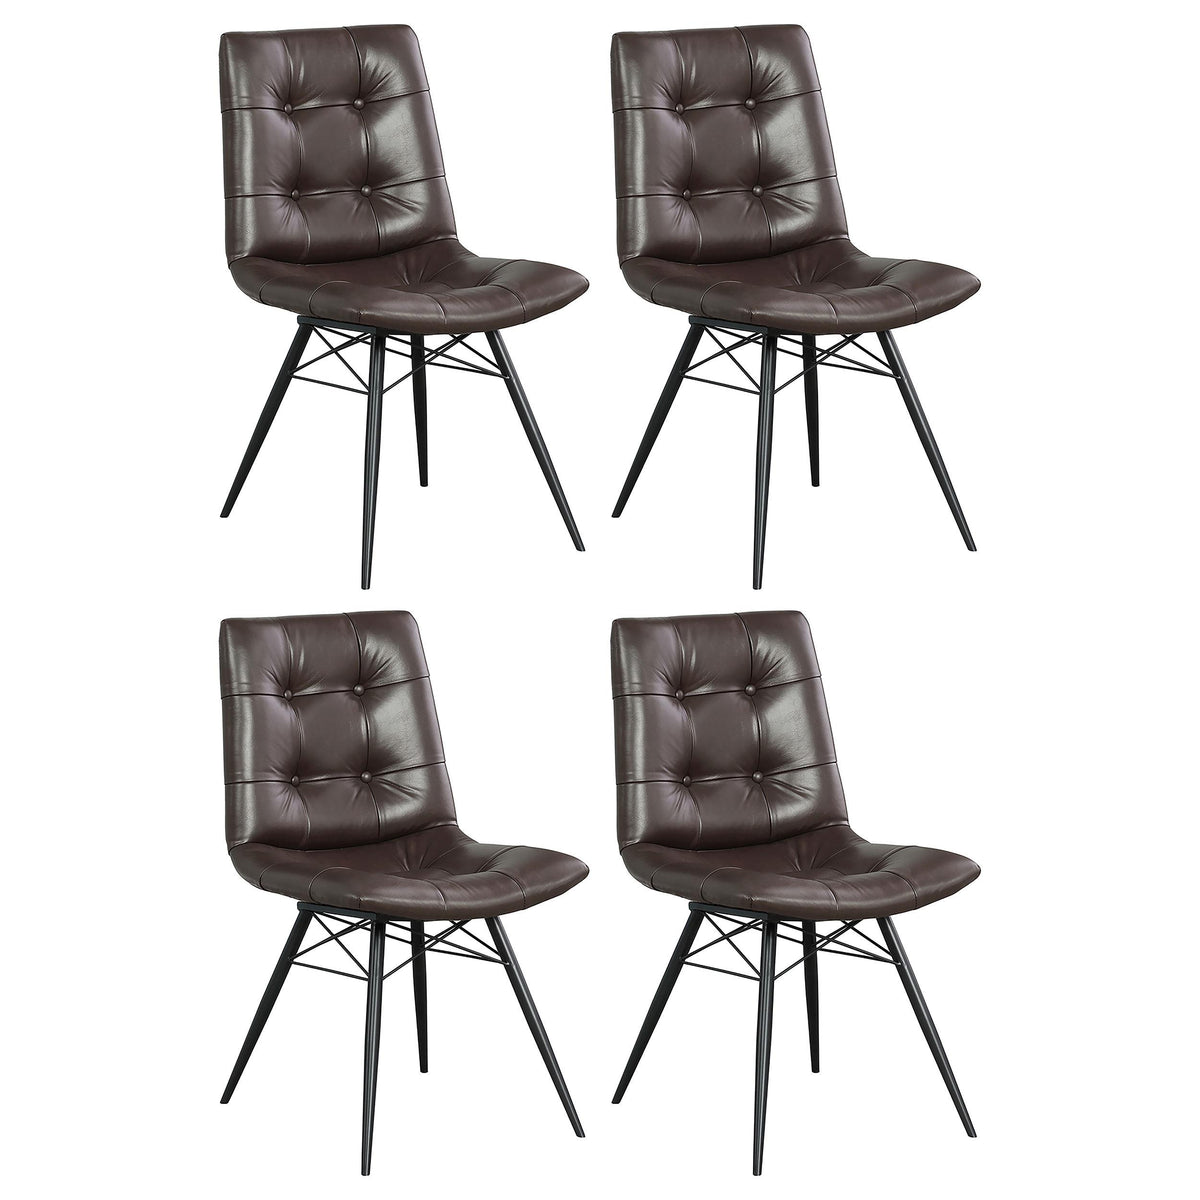 Aiken Upholstered Tufted Side Chairs Brown (Set of 4) Aiken Upholstered Tufted Side Chairs Brown (Set of 4) Half Price Furniture